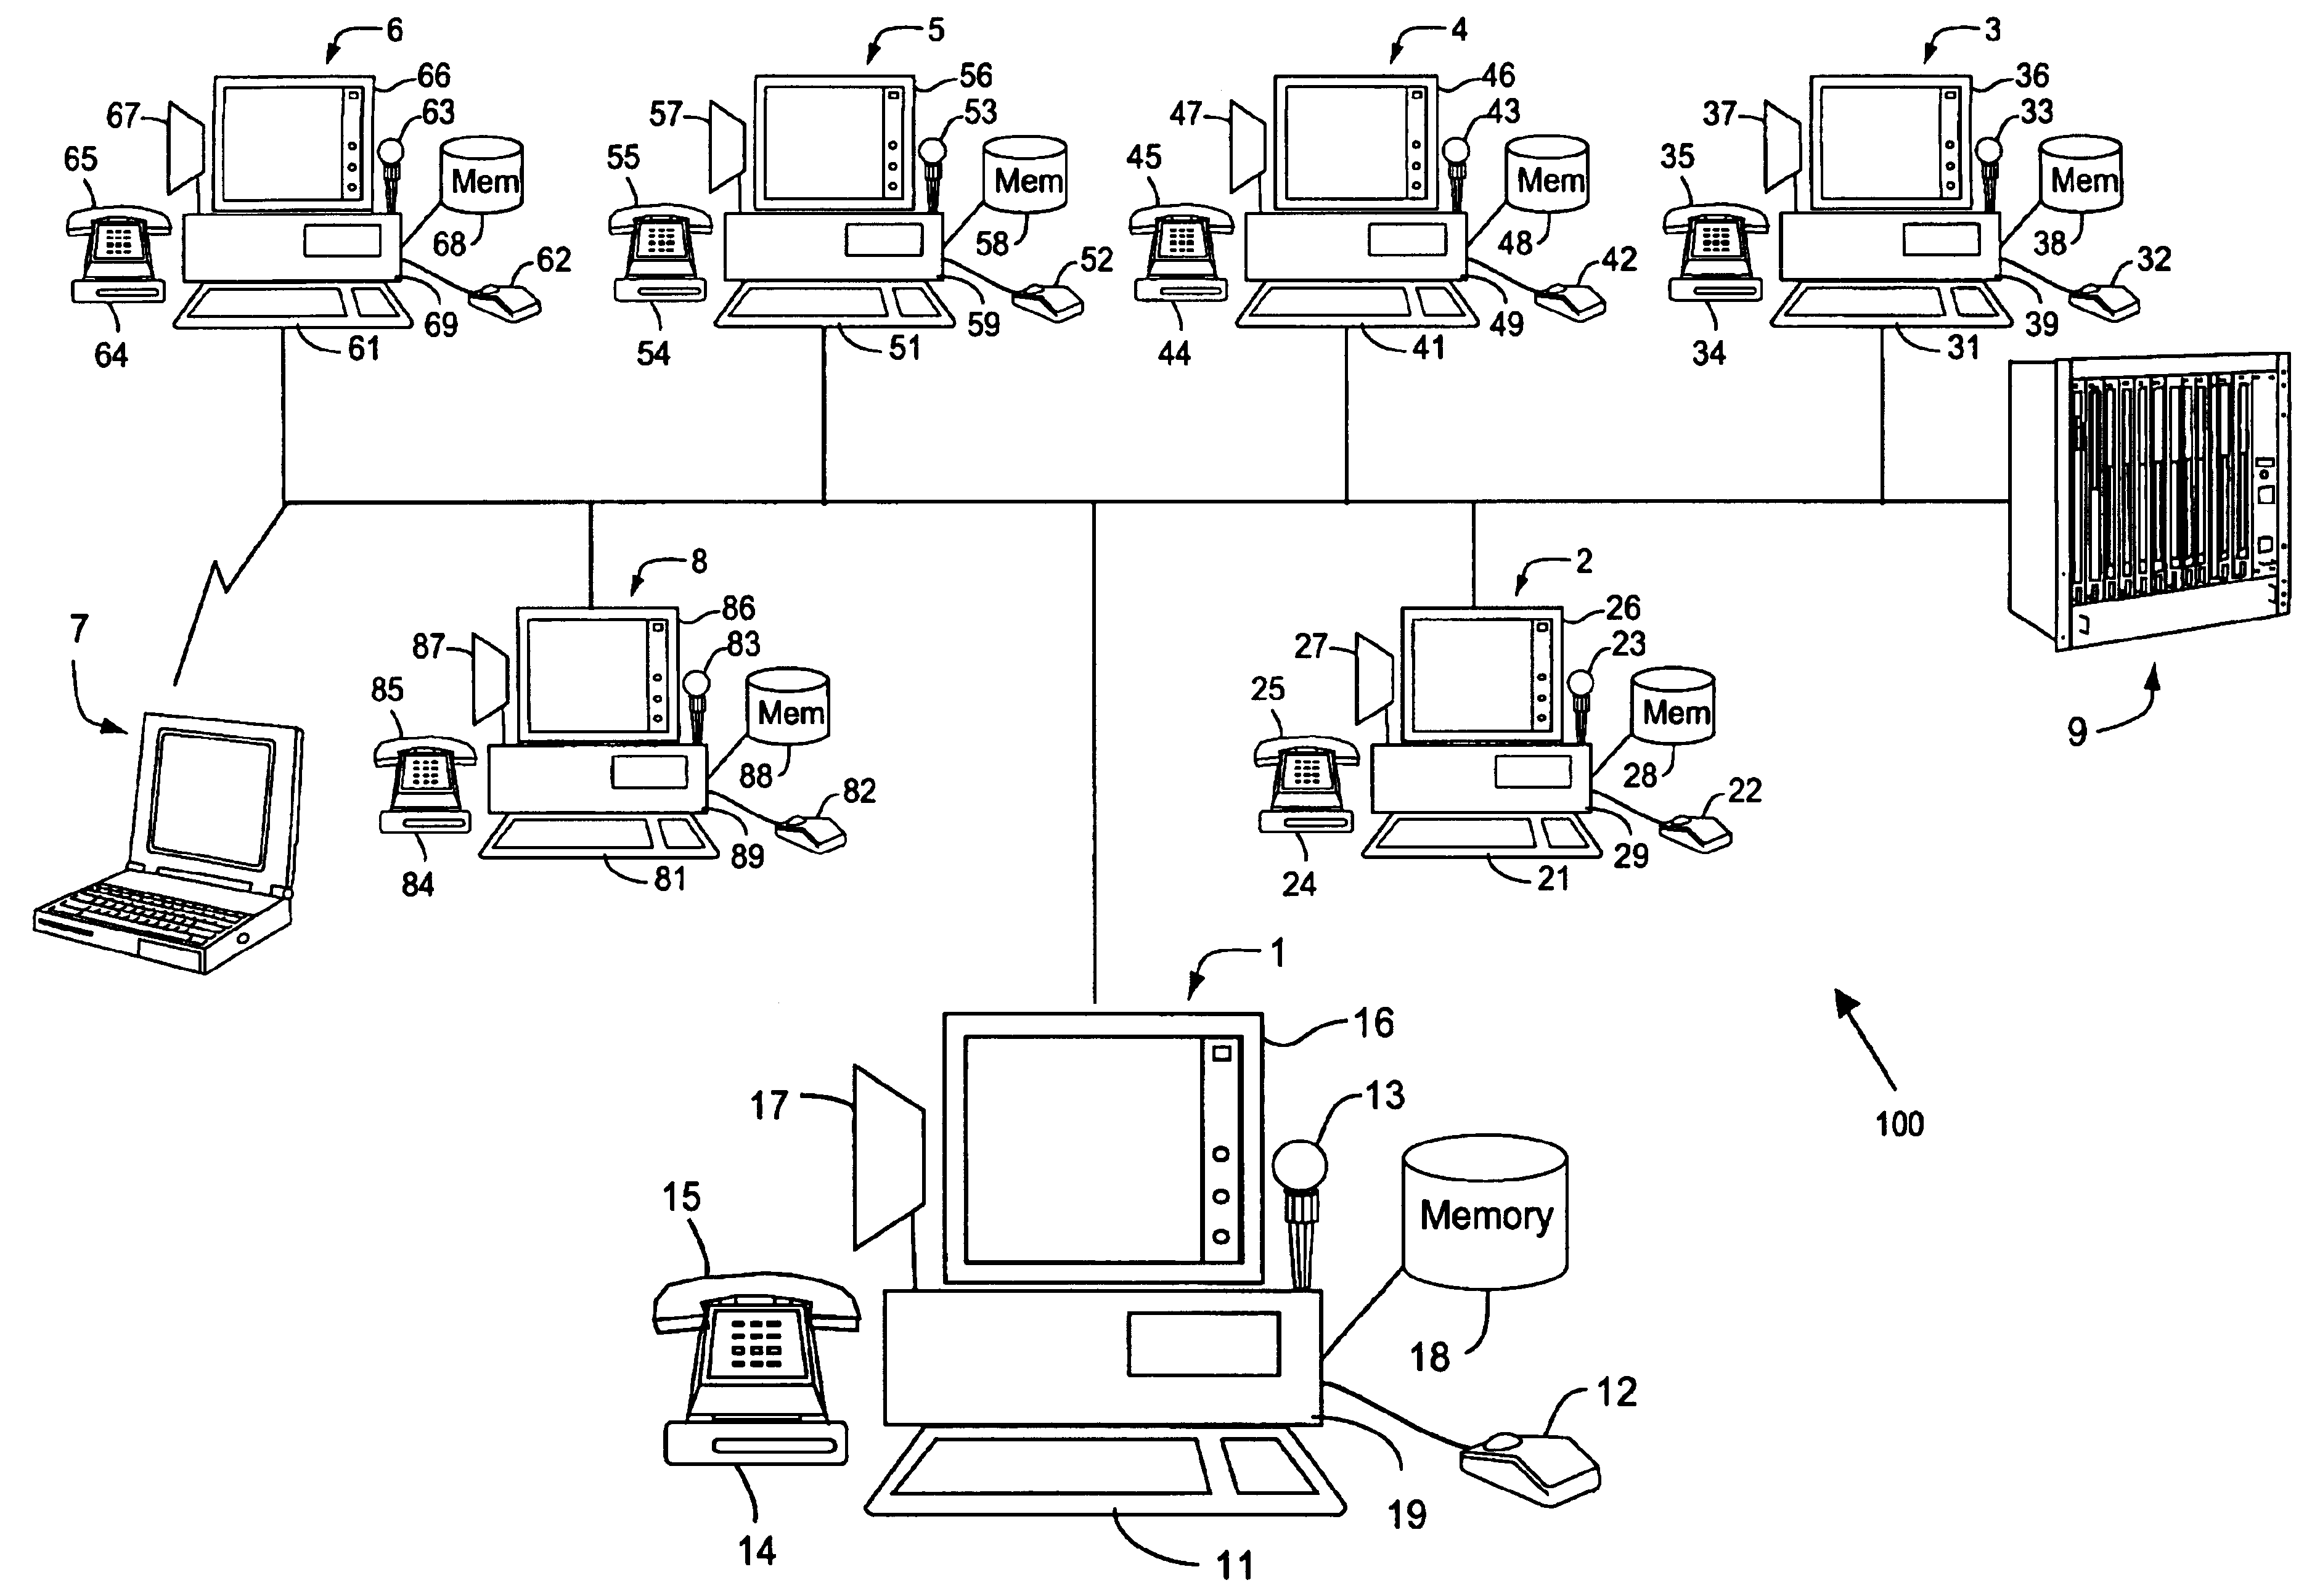 Computer network indicating relatedness of attributes of monitored terminals